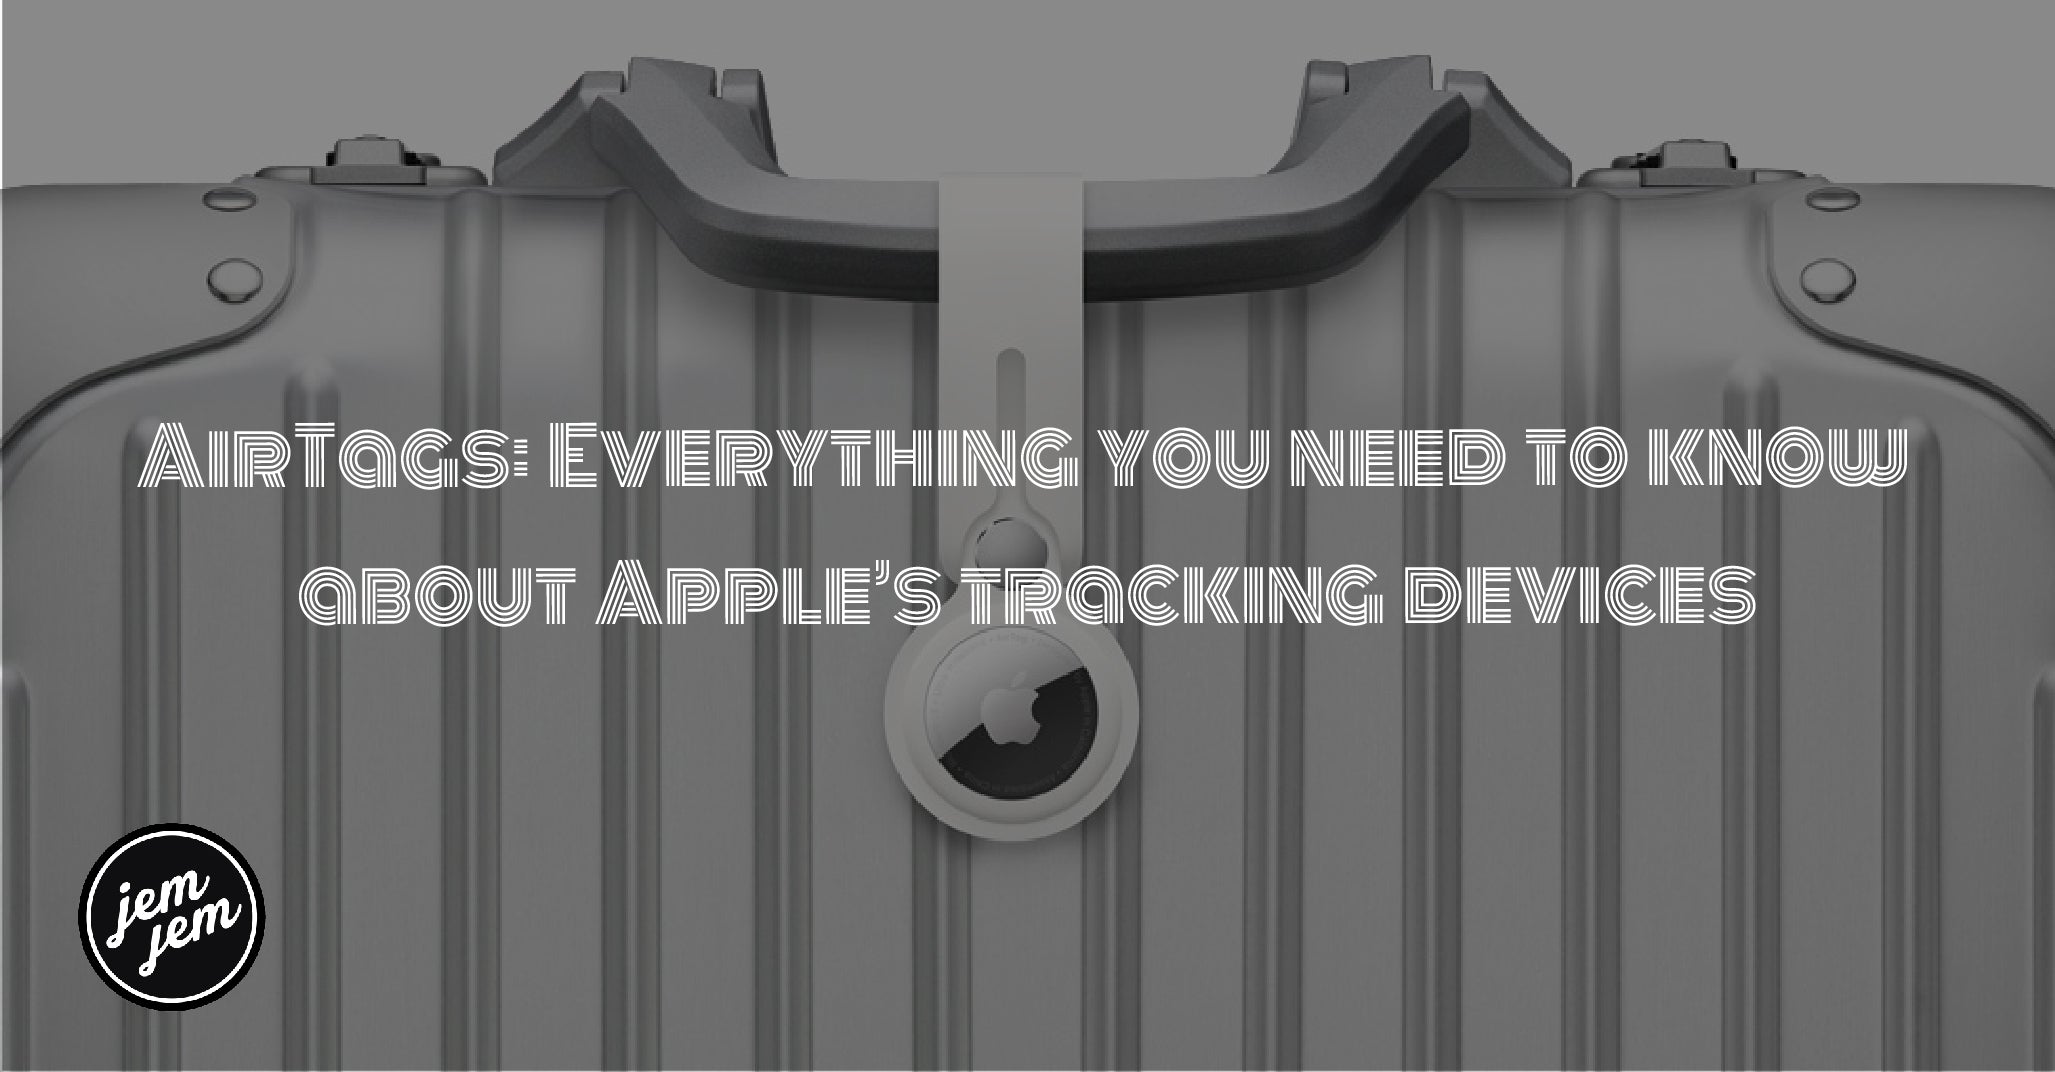 AirTags:  Everything  you  need  to  know  about  Apple’s  AirTags